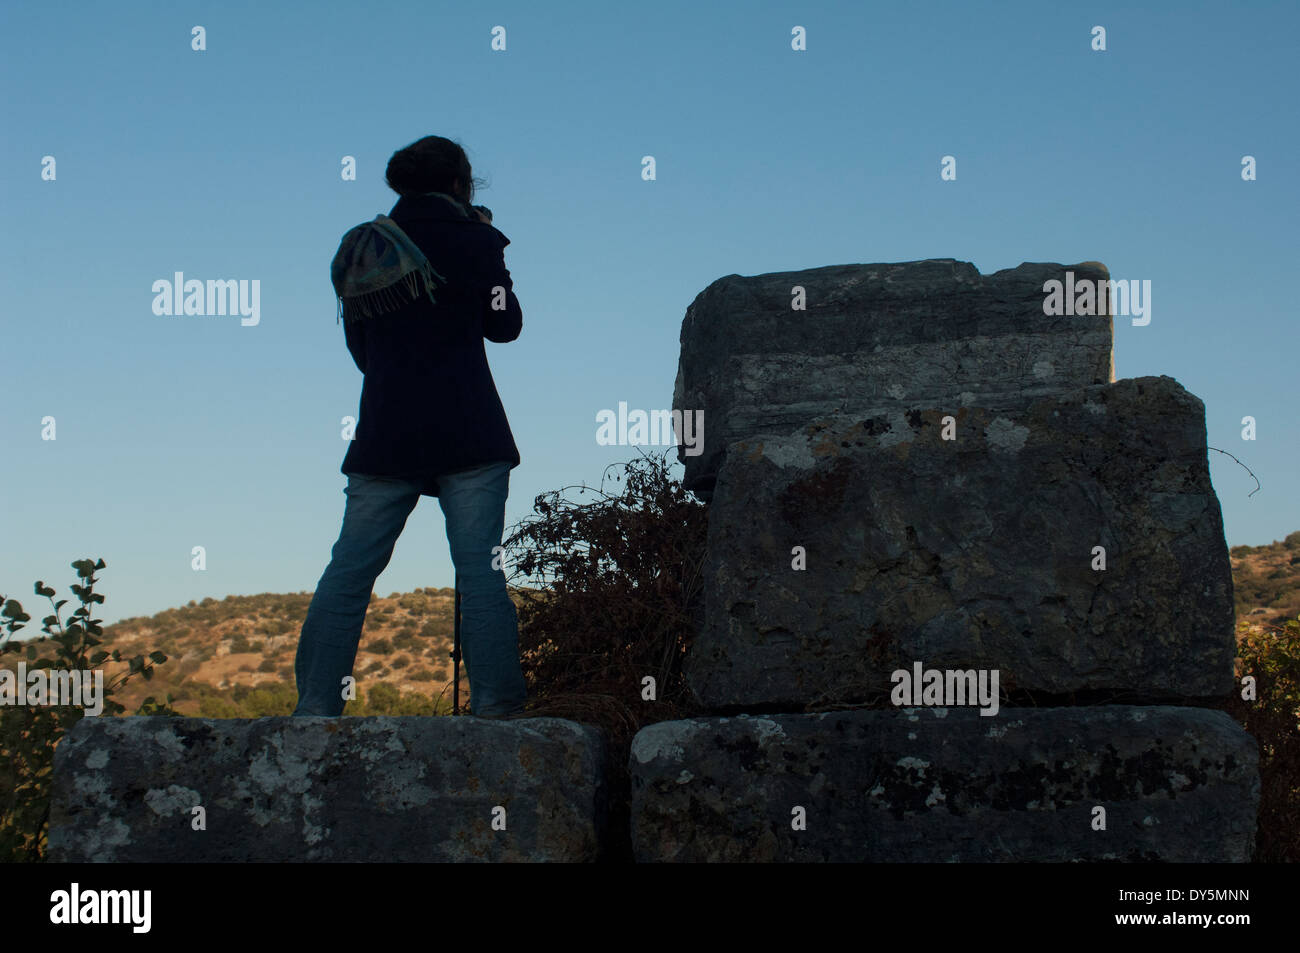 Photographer at work on the ruins of Ephesus, a Graeco-Roman City in Turkey. Digital photograph Stock Photo